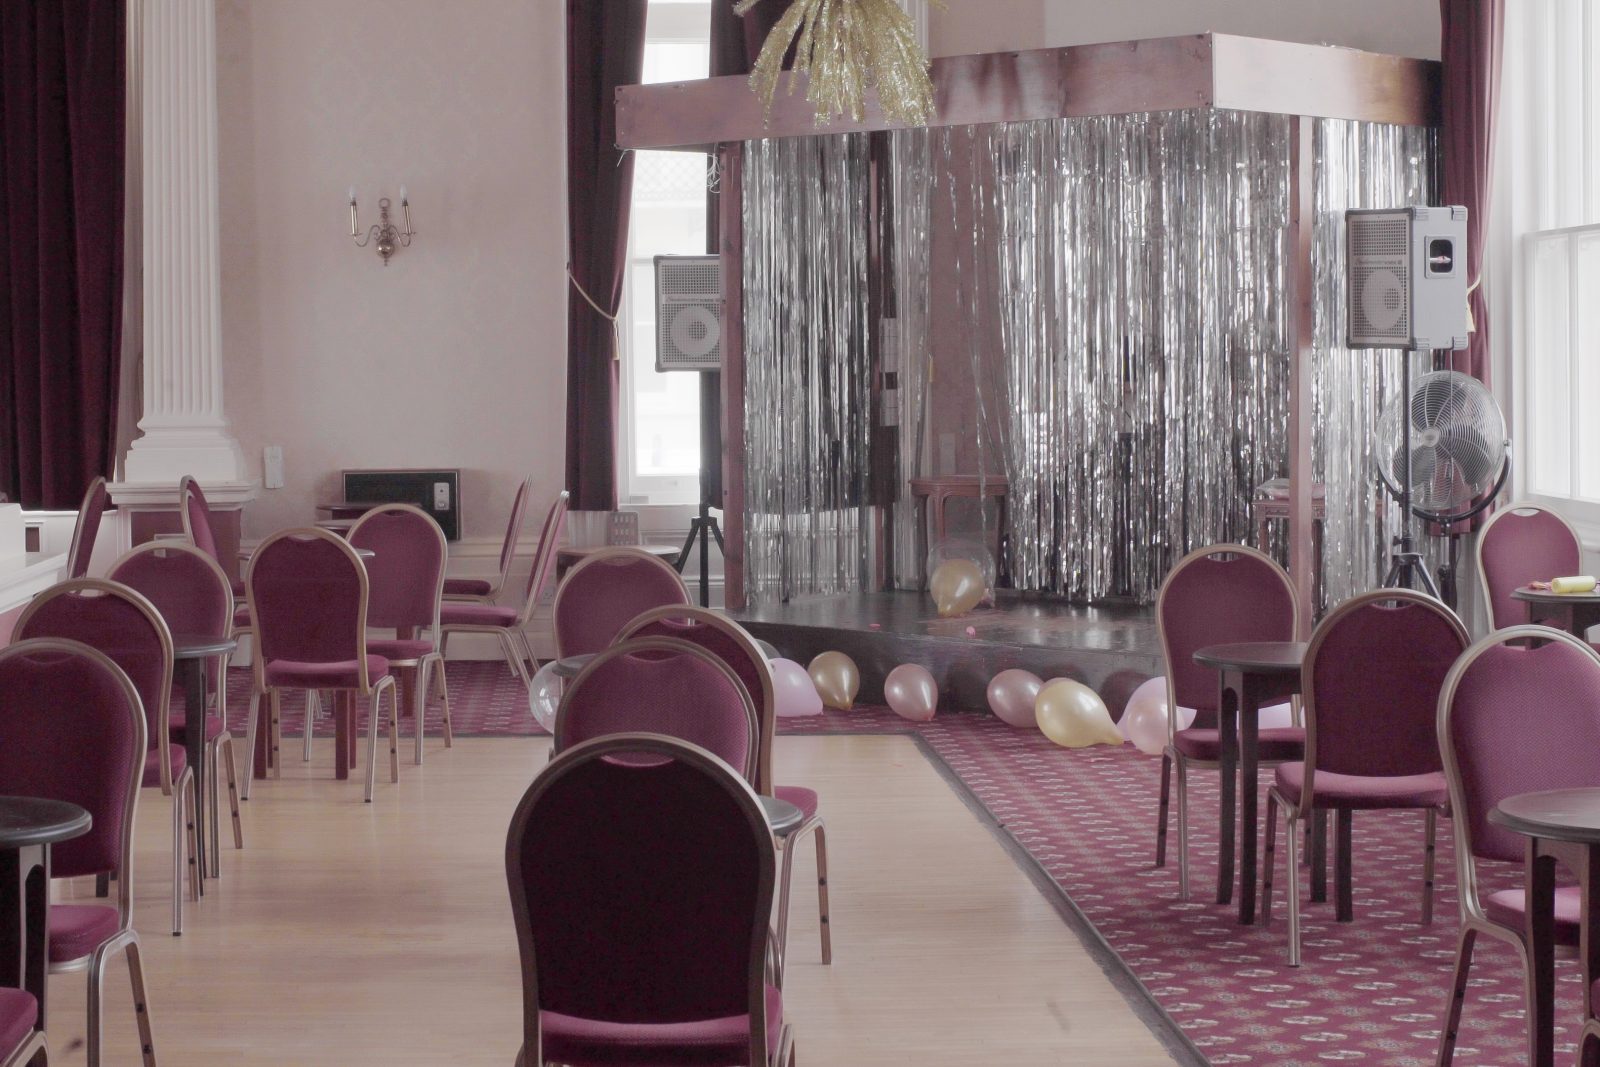 Room in hotel with pink chairs dotted around. There is a silvery foil curtain in the background with pink balloons and a pink carpet at the bottom